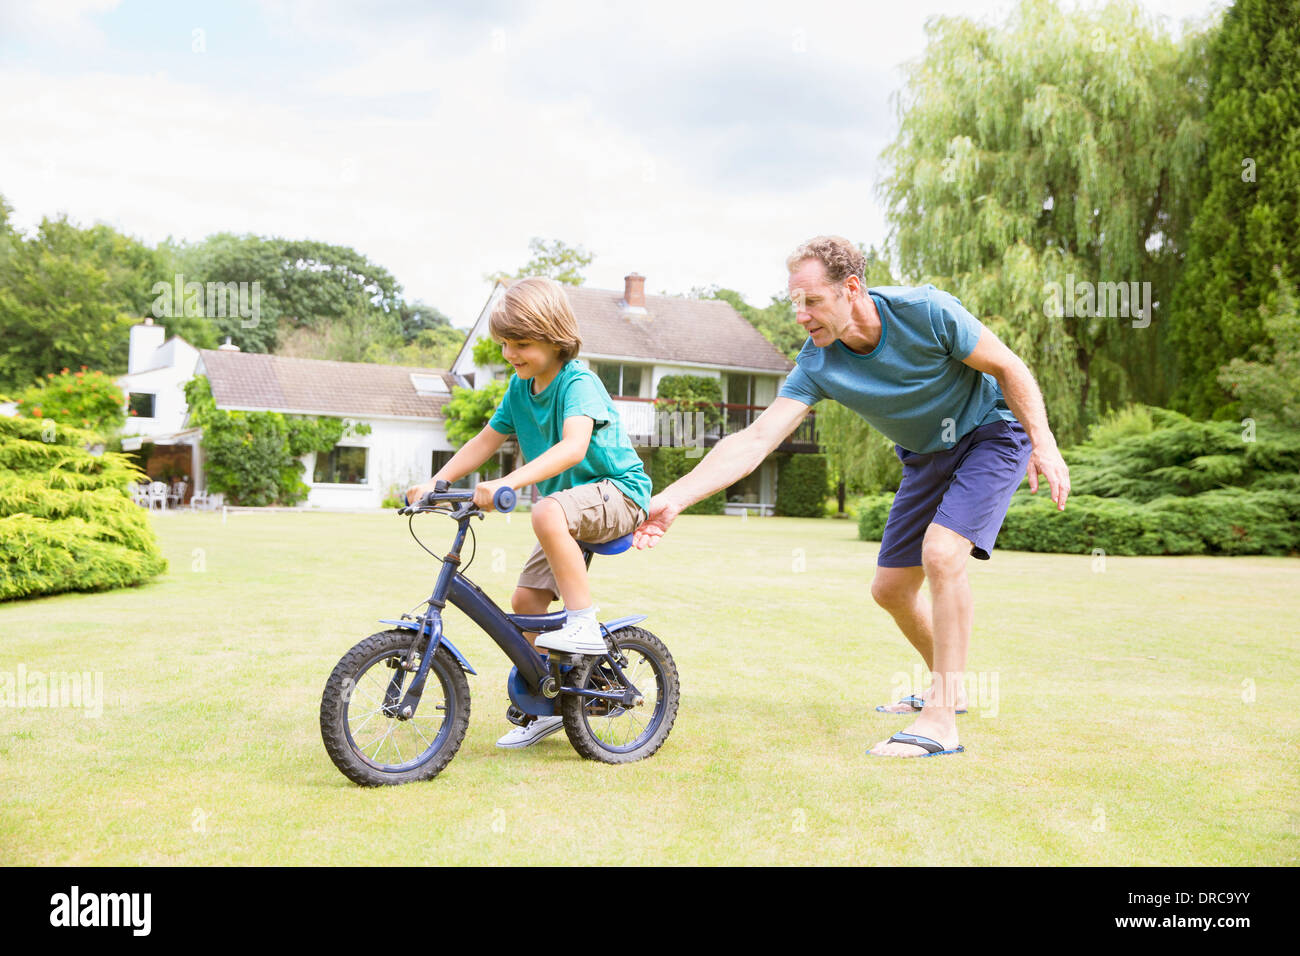 Father pushing son on bicycle in backyard Stock Photo